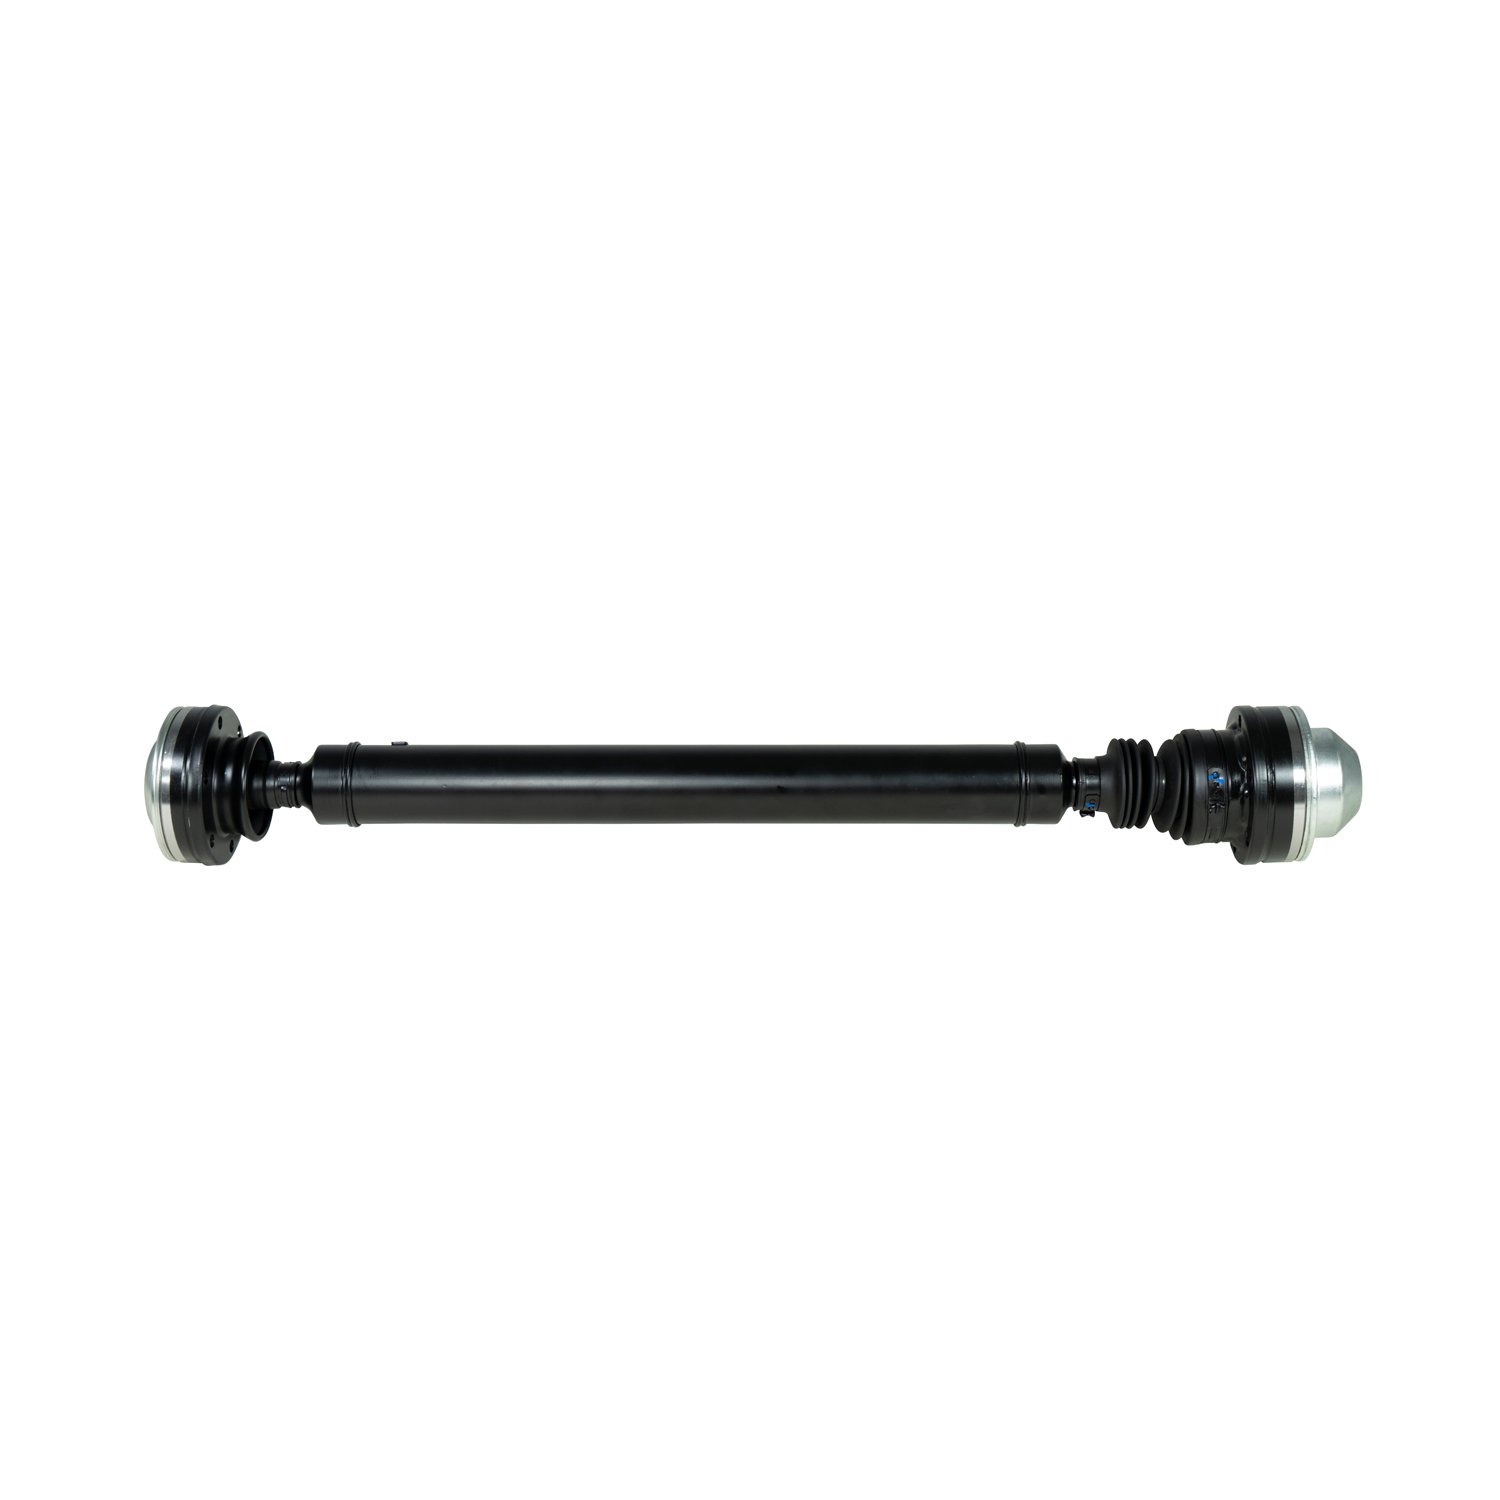 USA Standard ZDS9324 Front Driveshaft, For Jeep Liberty, 16-1/2 in. Weld-To-Weld